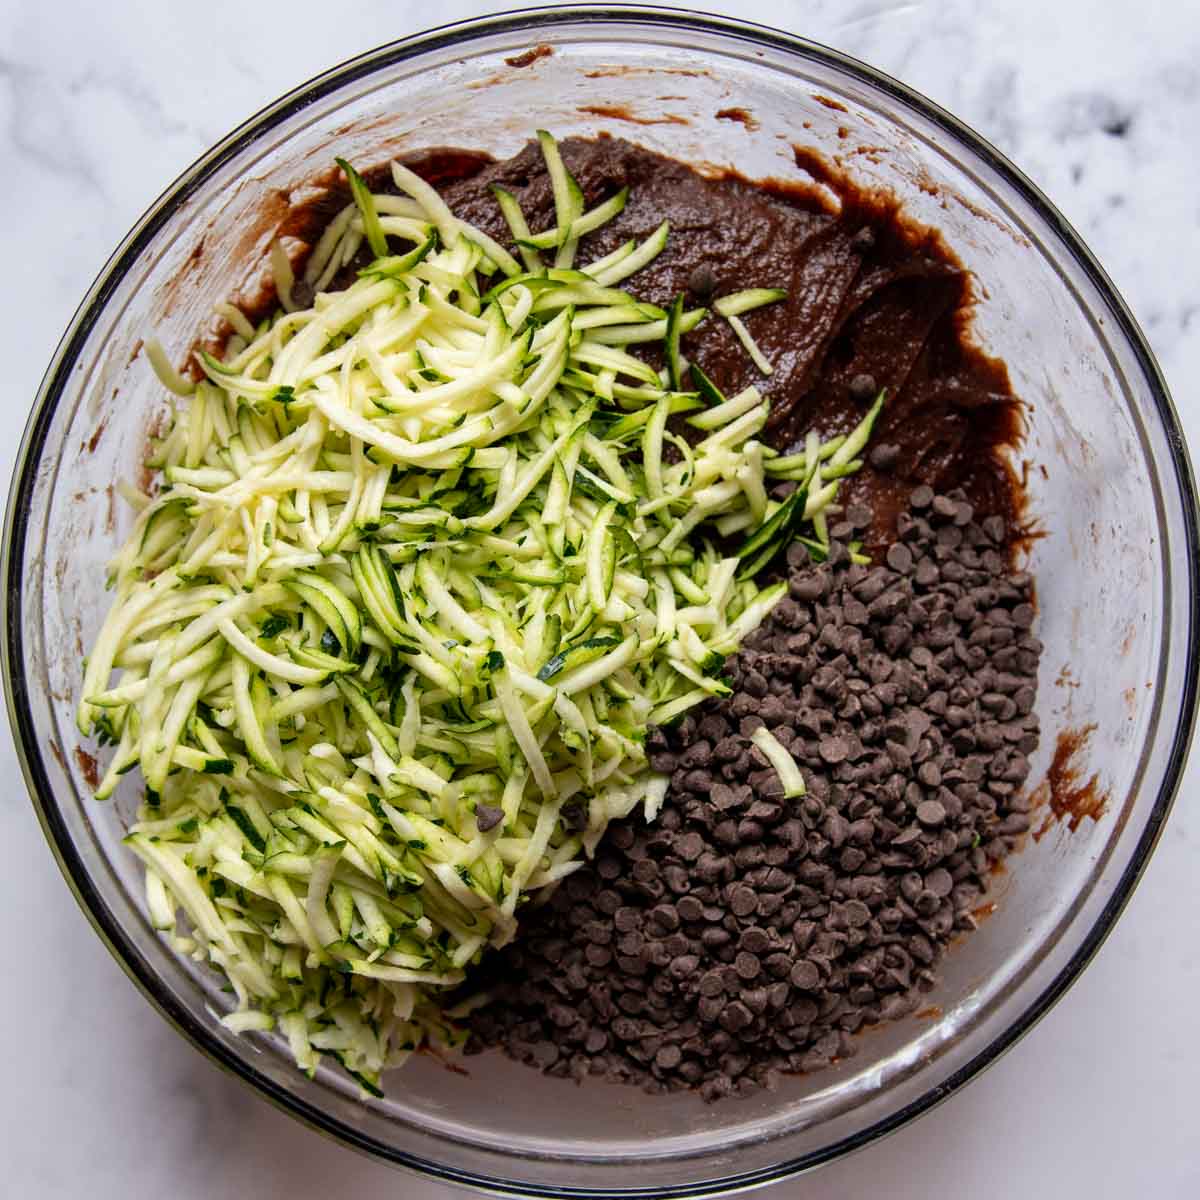 images showing adding grated zucchini to the cake batter